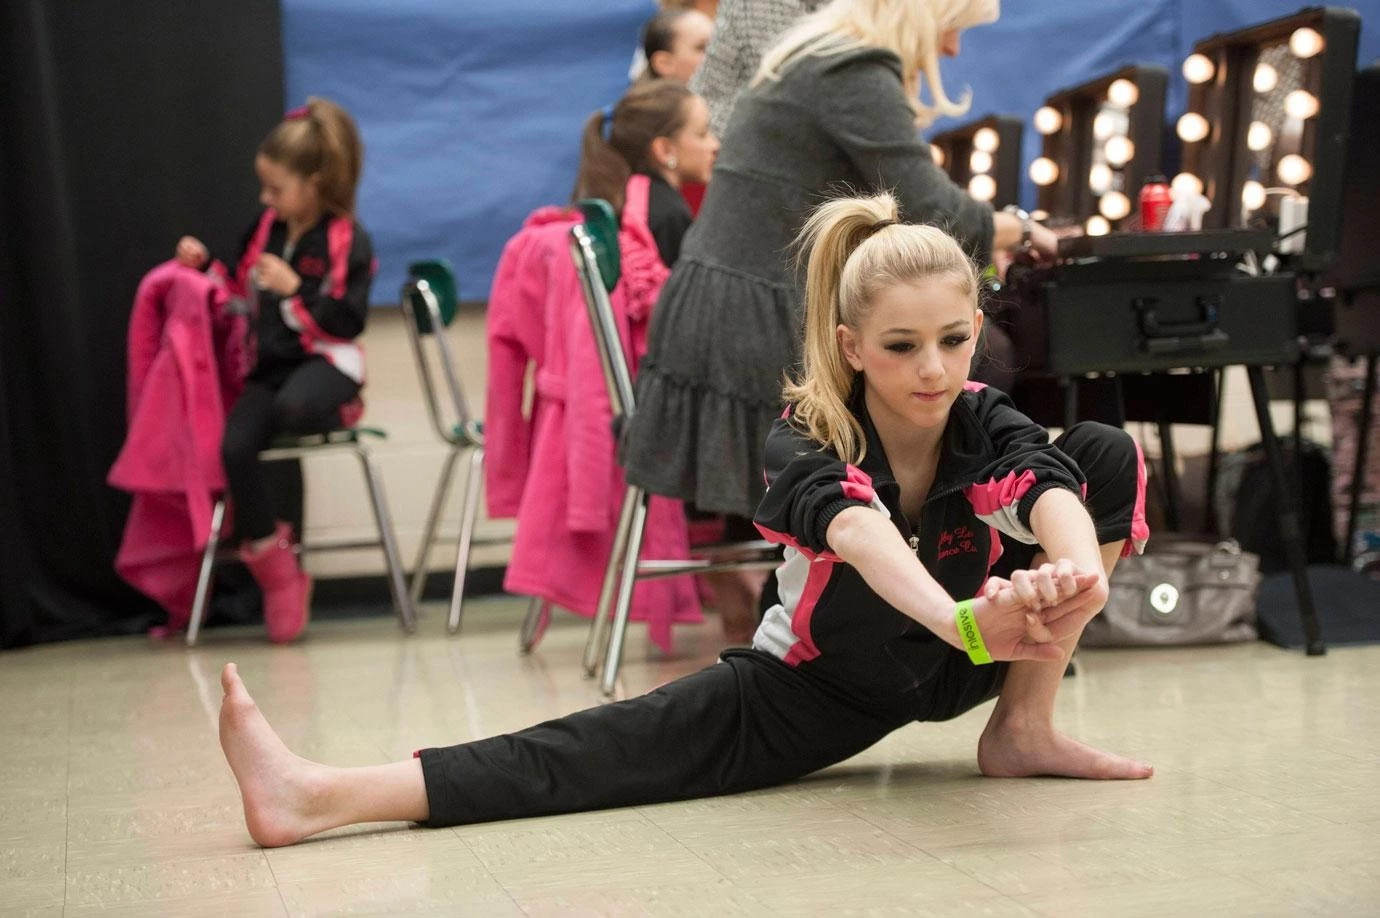 Then: Chloe From Dance Moms Was A Great Dancer